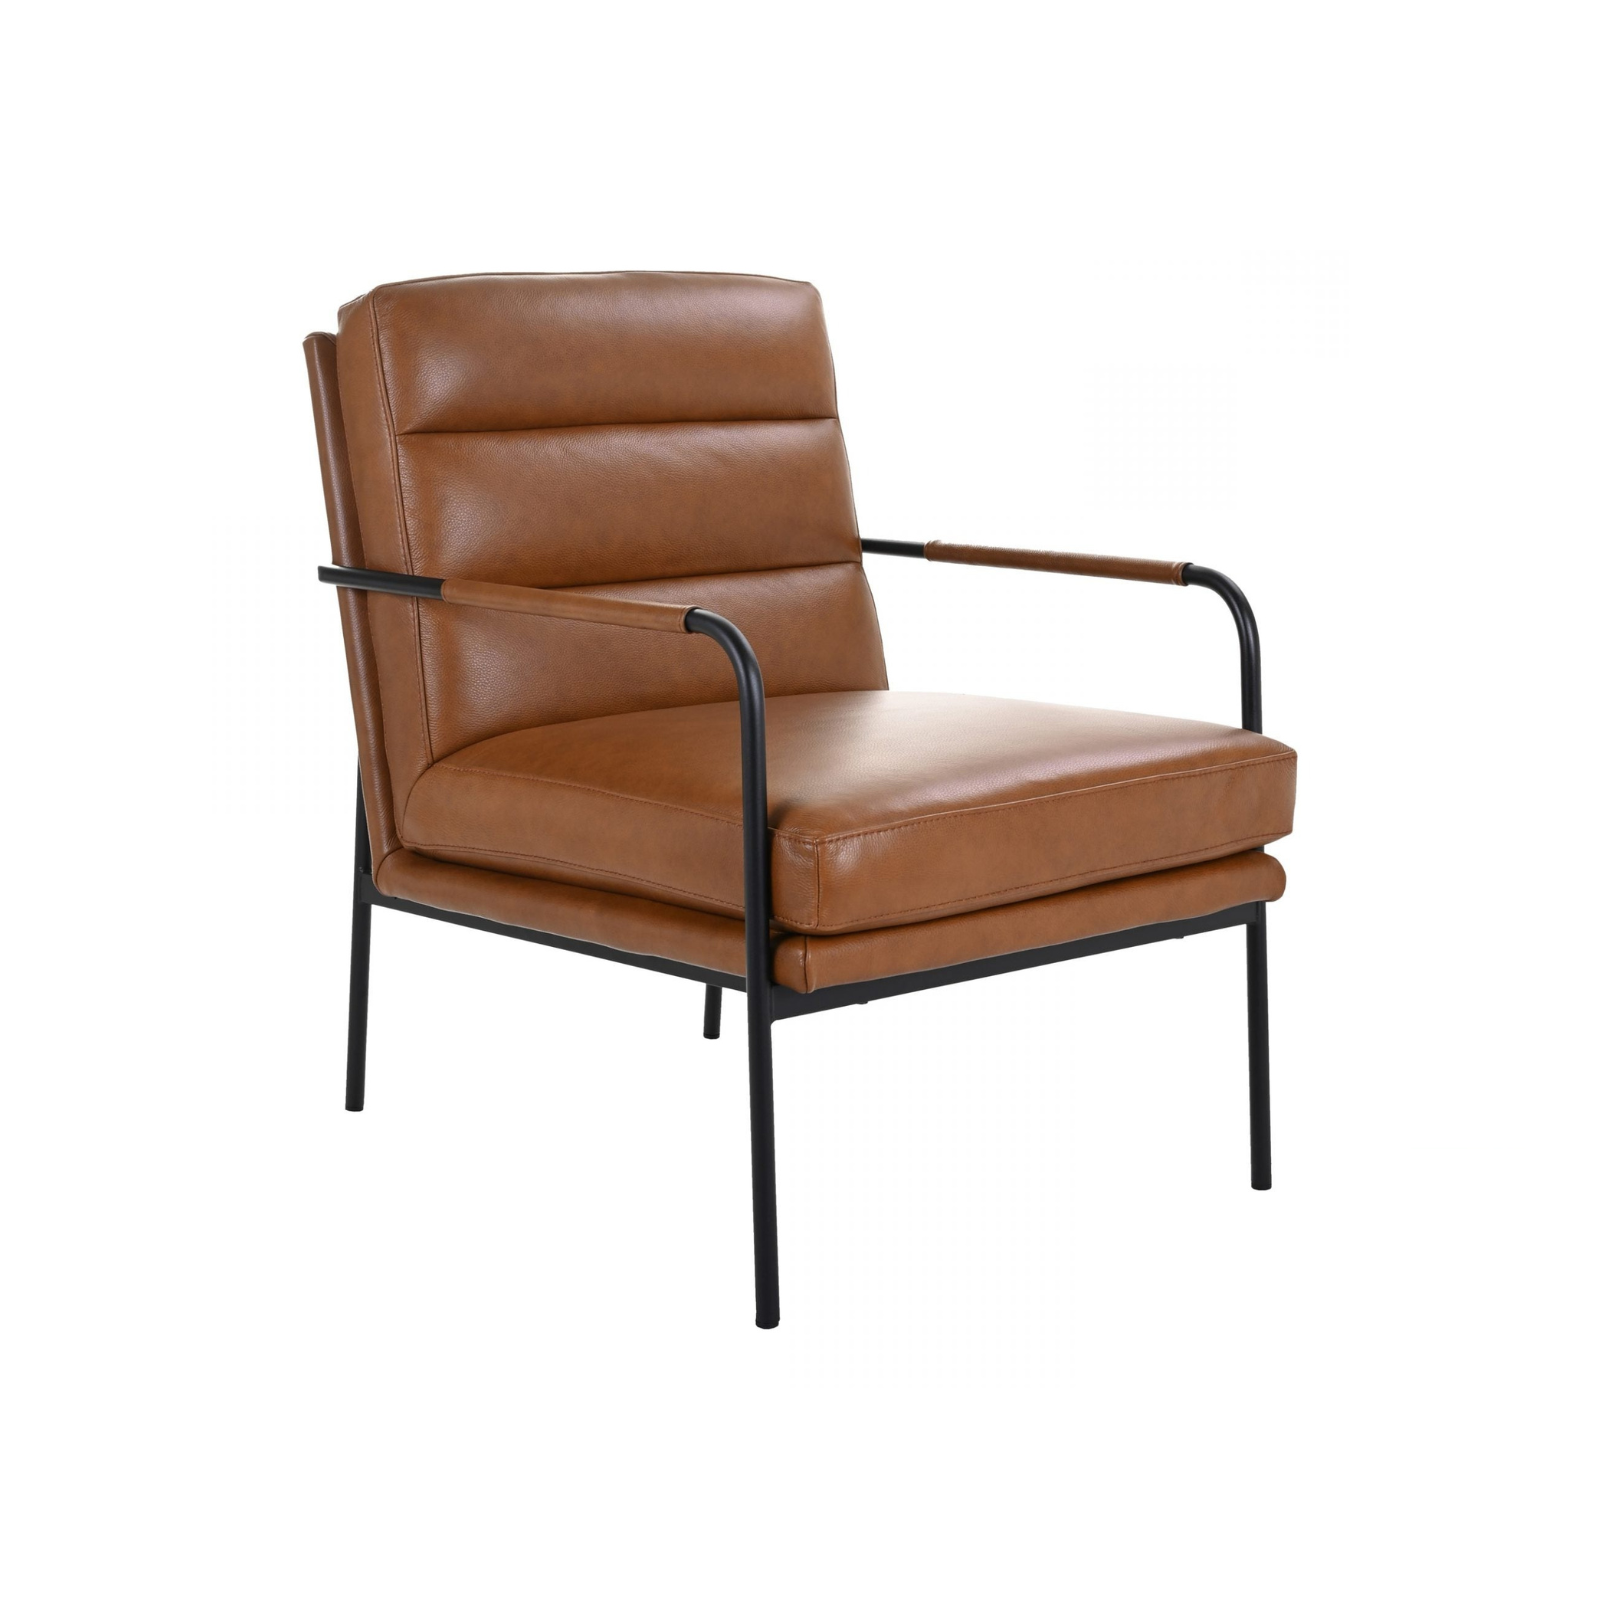 Valerie Lounge Chair